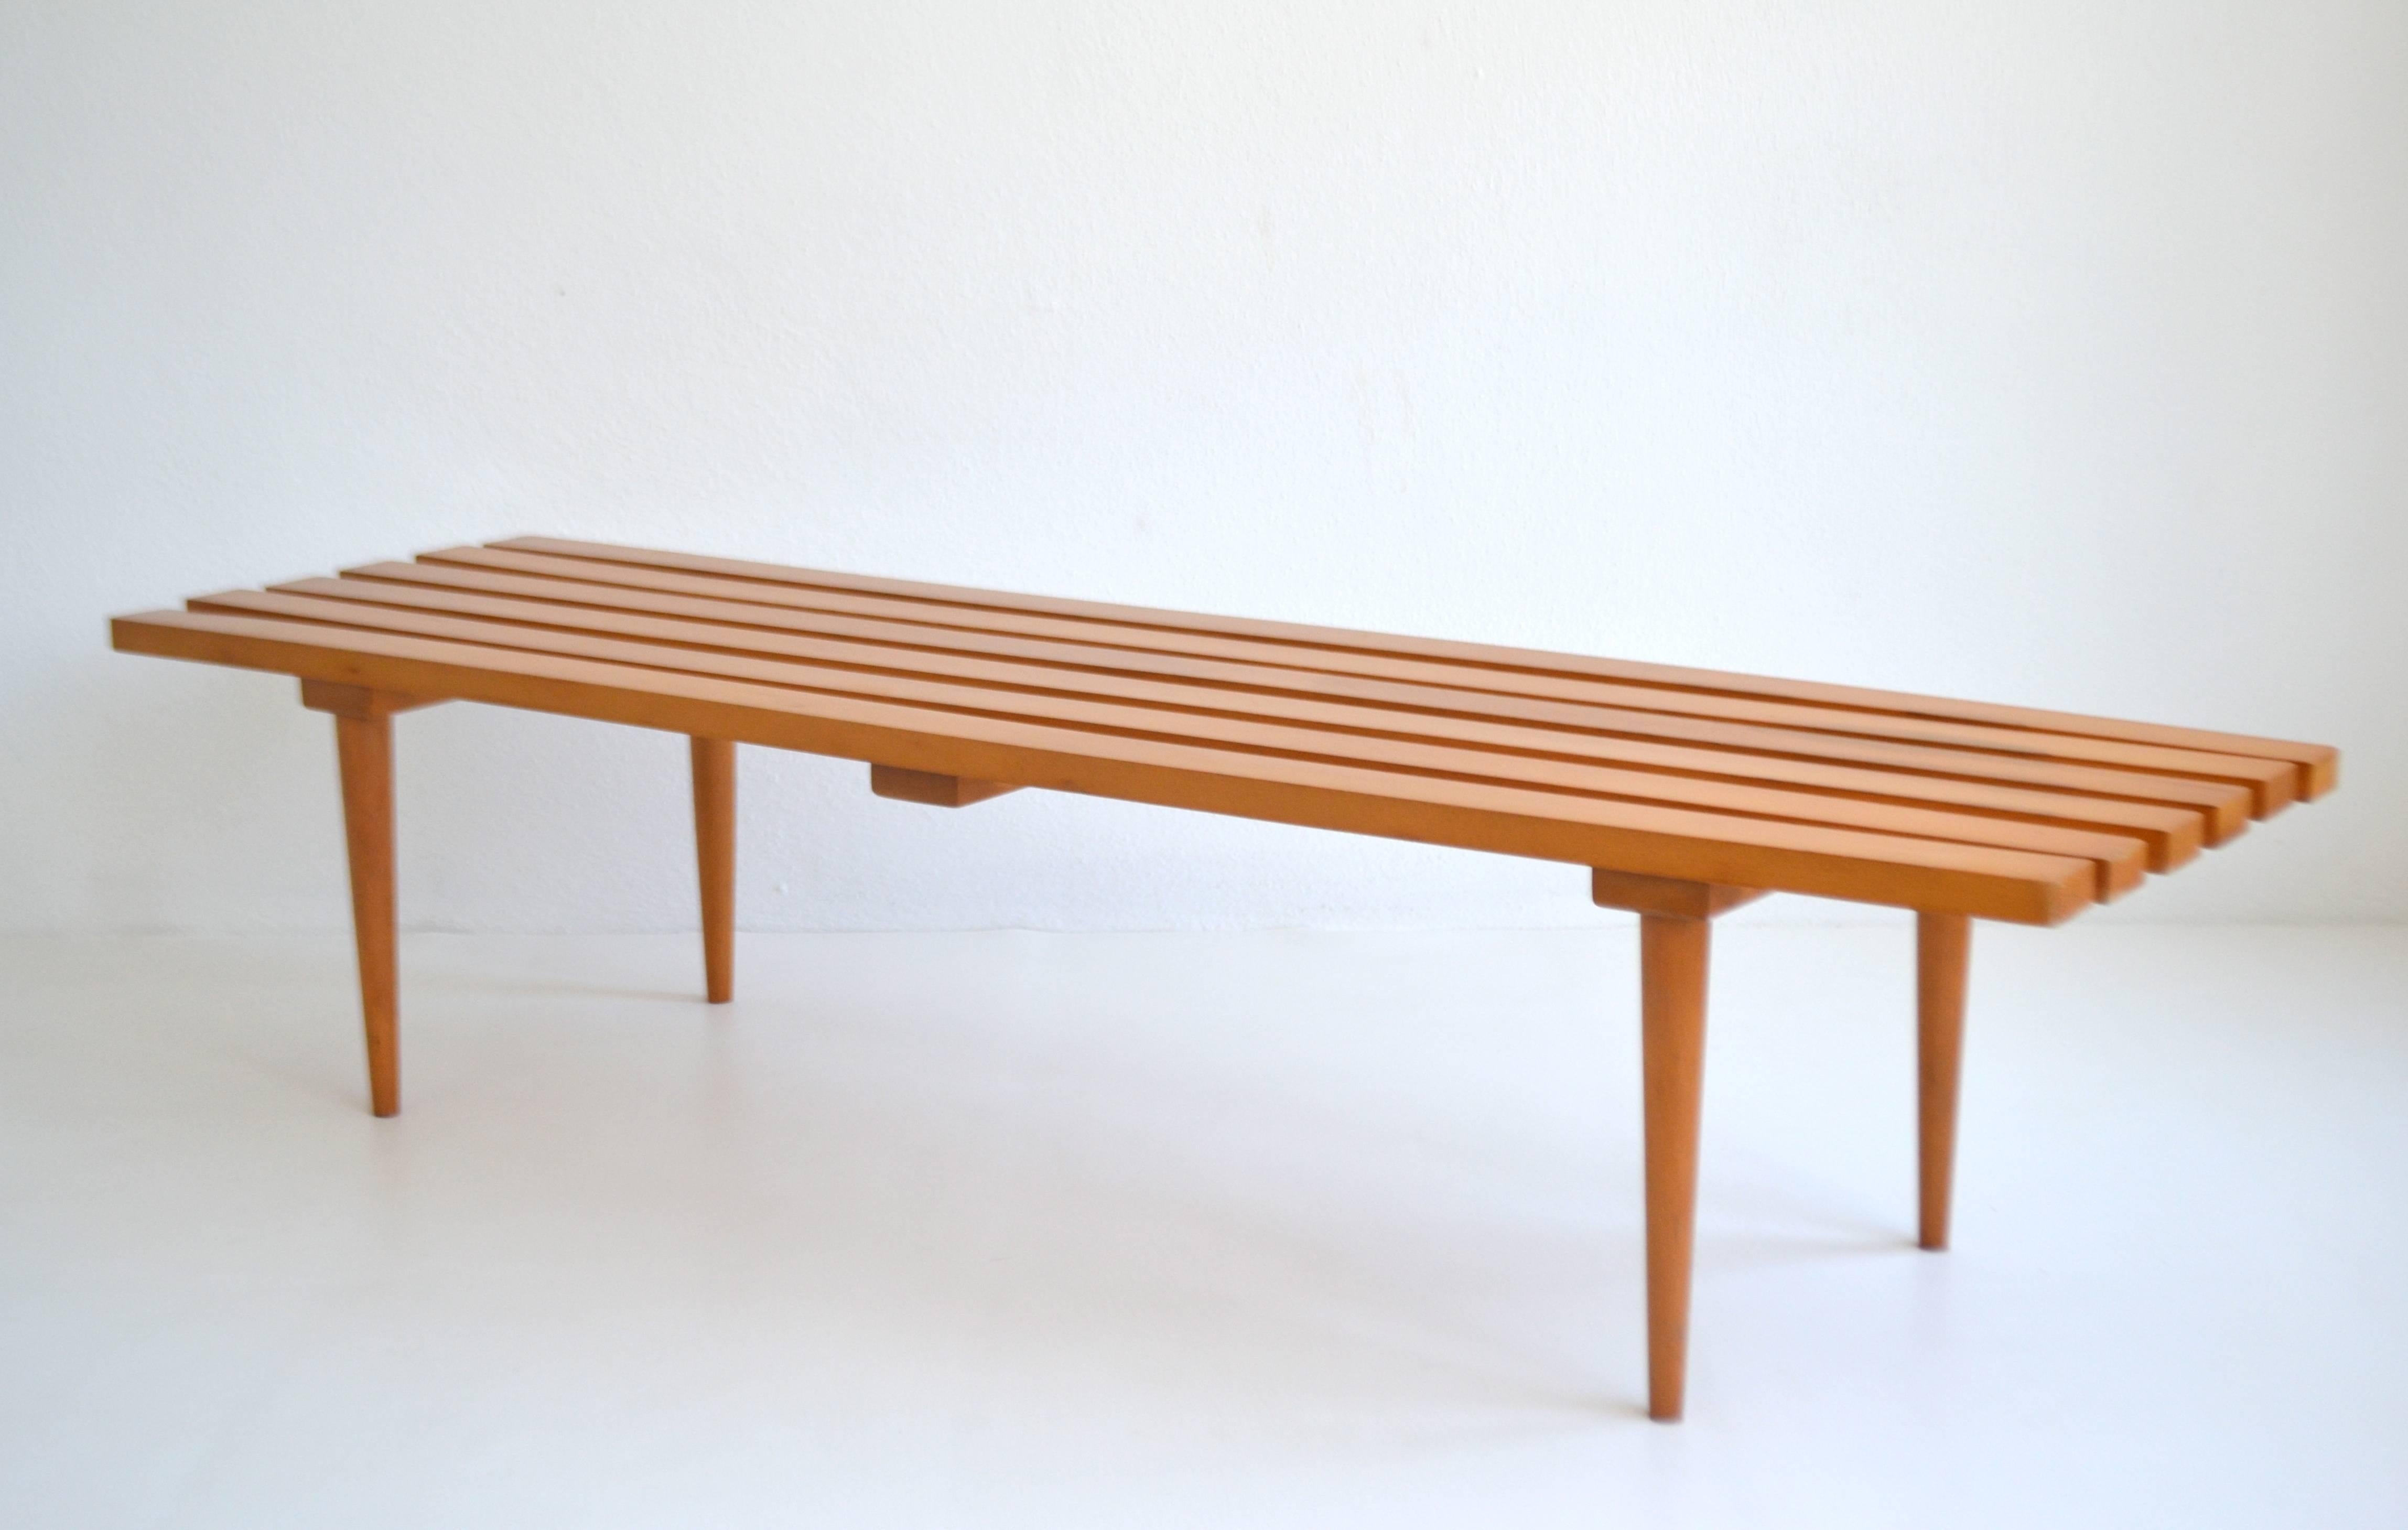 Striking midcentury maple slat wood bench, circa 1960s-1970. The streamlined design allows this form to be versatilely used as a cocktail/ coffee table.